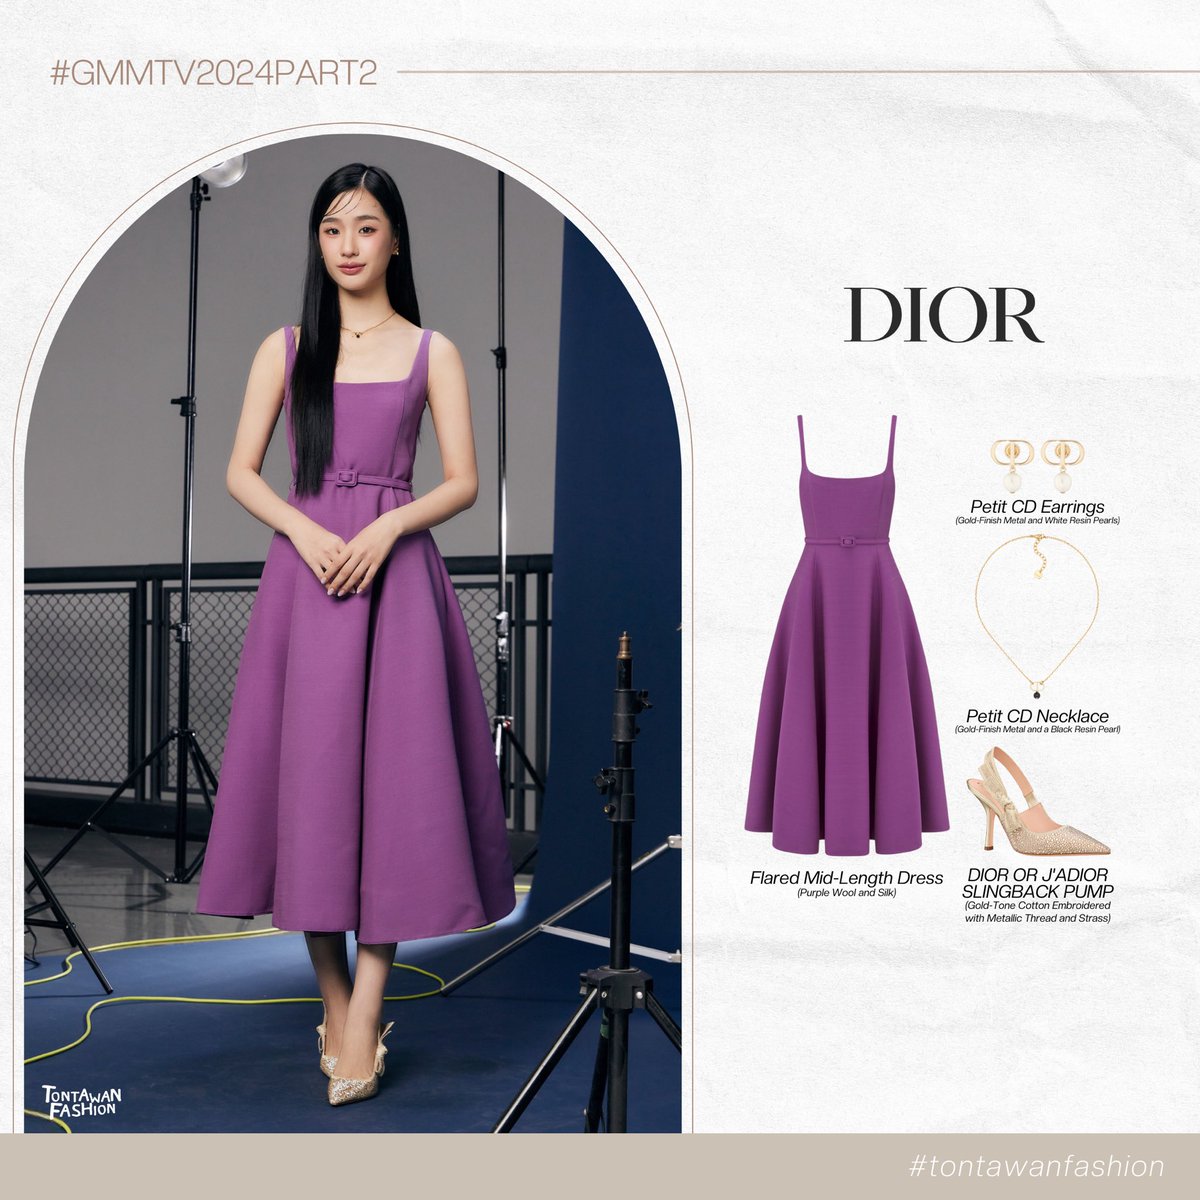 🌻 #tontawanfashion All @Dior Flared Mid-Length Dress Petit CD Earrings (Gold-Finish Metal and White Resin Pearls) Petit CD Necklace (Gold-Finish Metal and a Black Resin Pearl) DIOR OR J'ADIOR SLINGBACK PUMP 📷 IG : GMMTV #GMMTV2024PART2 #tontawan_t #tontawan #intuyou